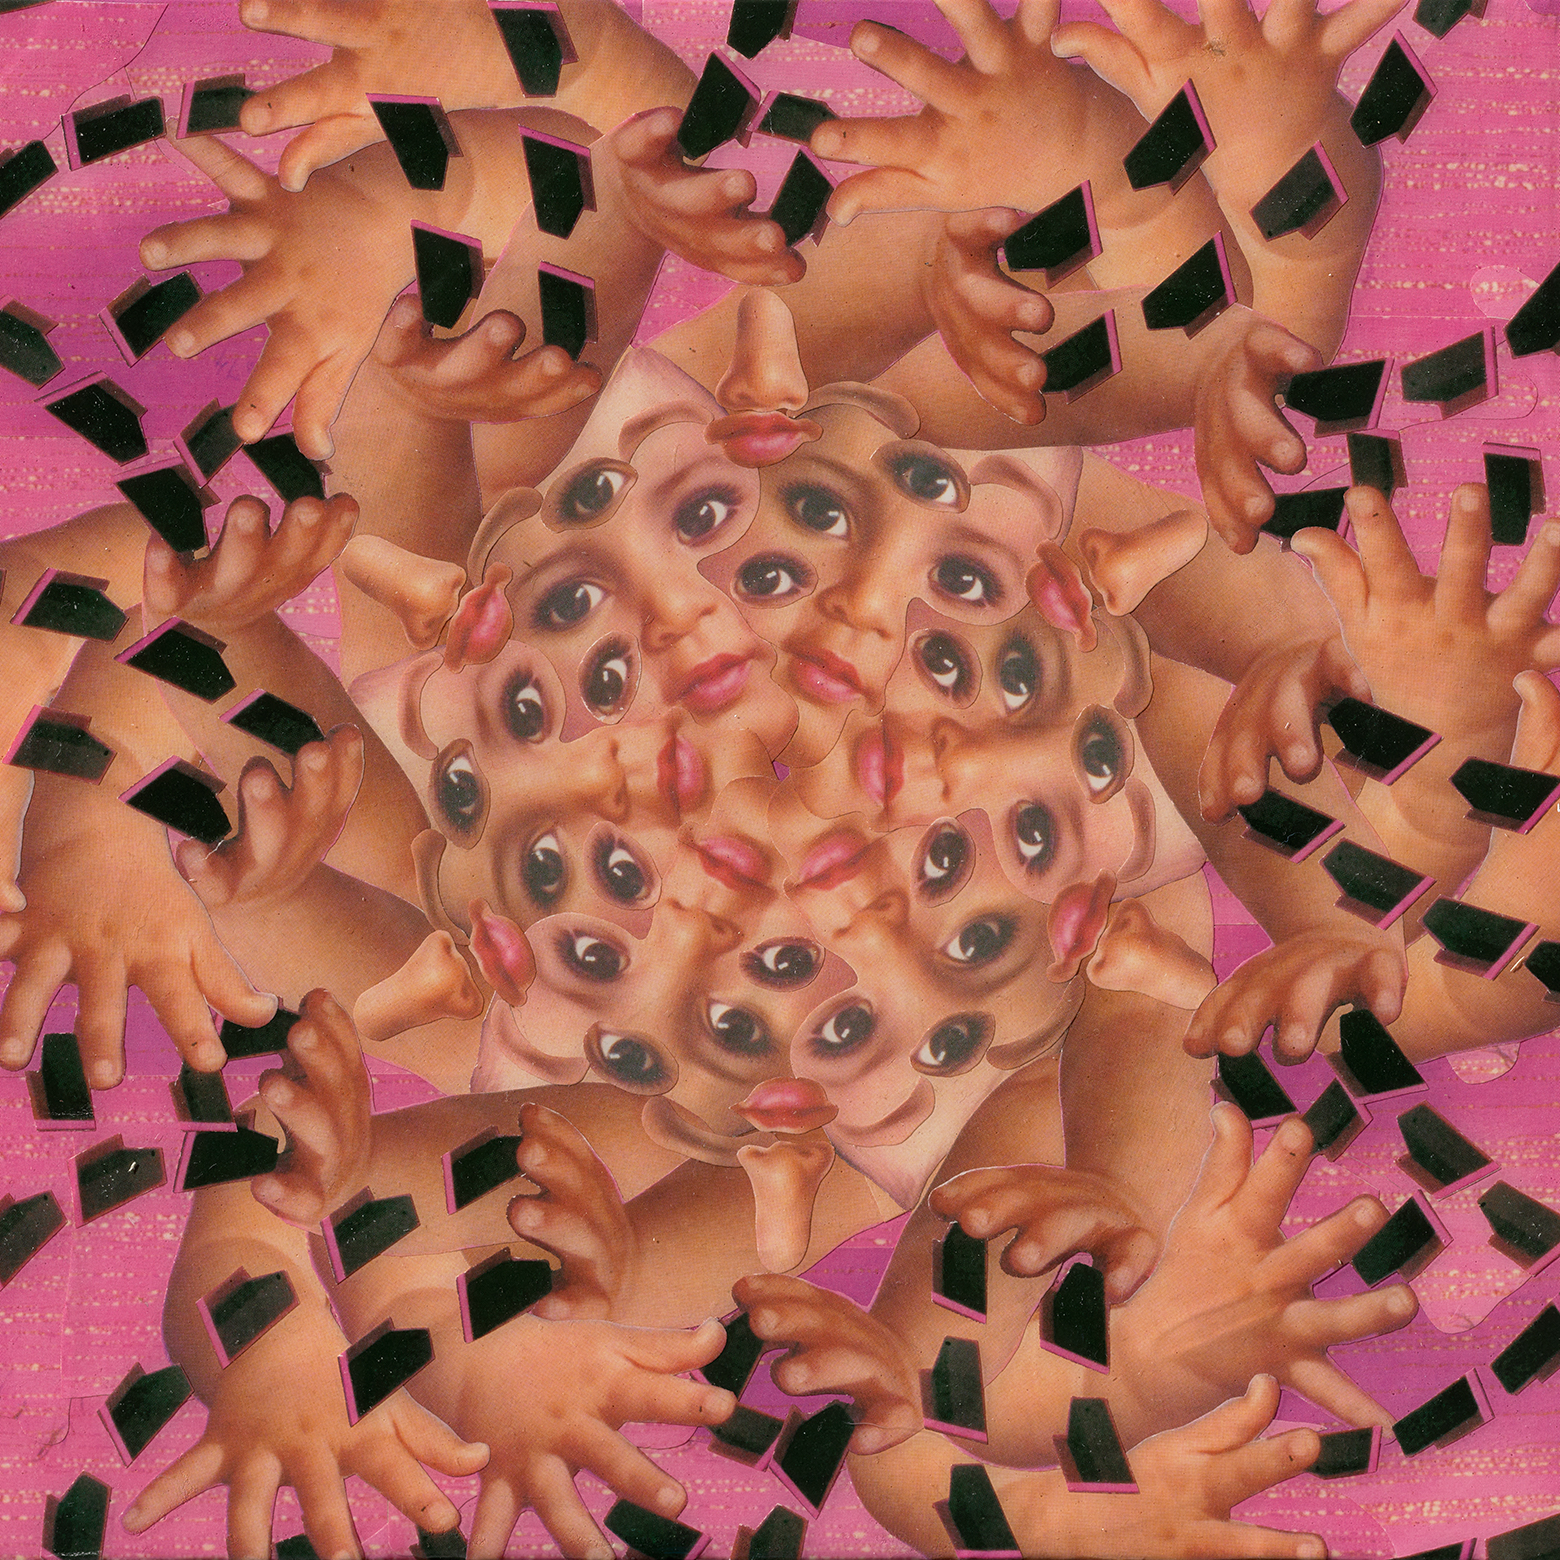 A spiraling collage of infant arms and faces on a pink background